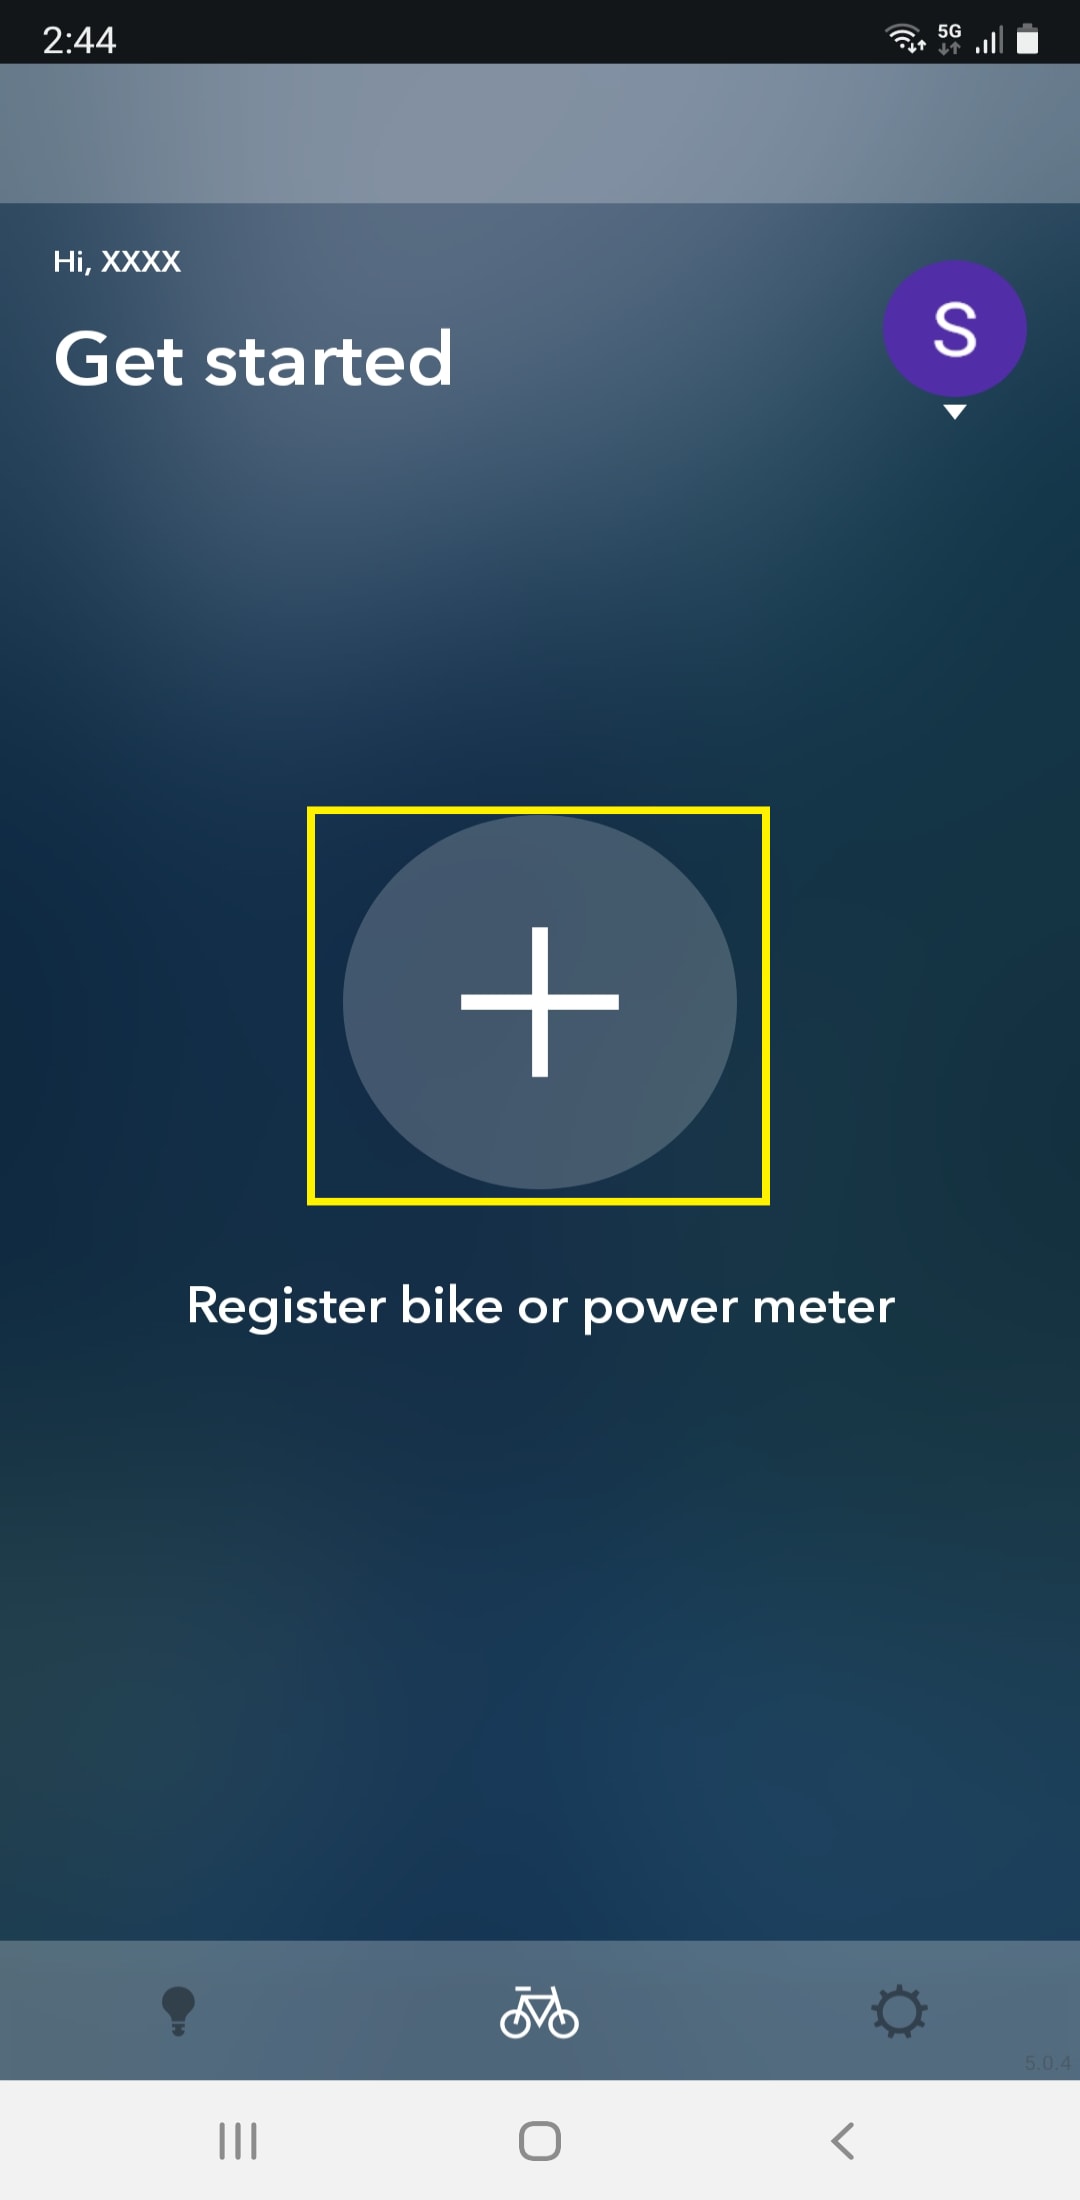 Once the Bicycle registration screen is displayed, tap the plus mark.